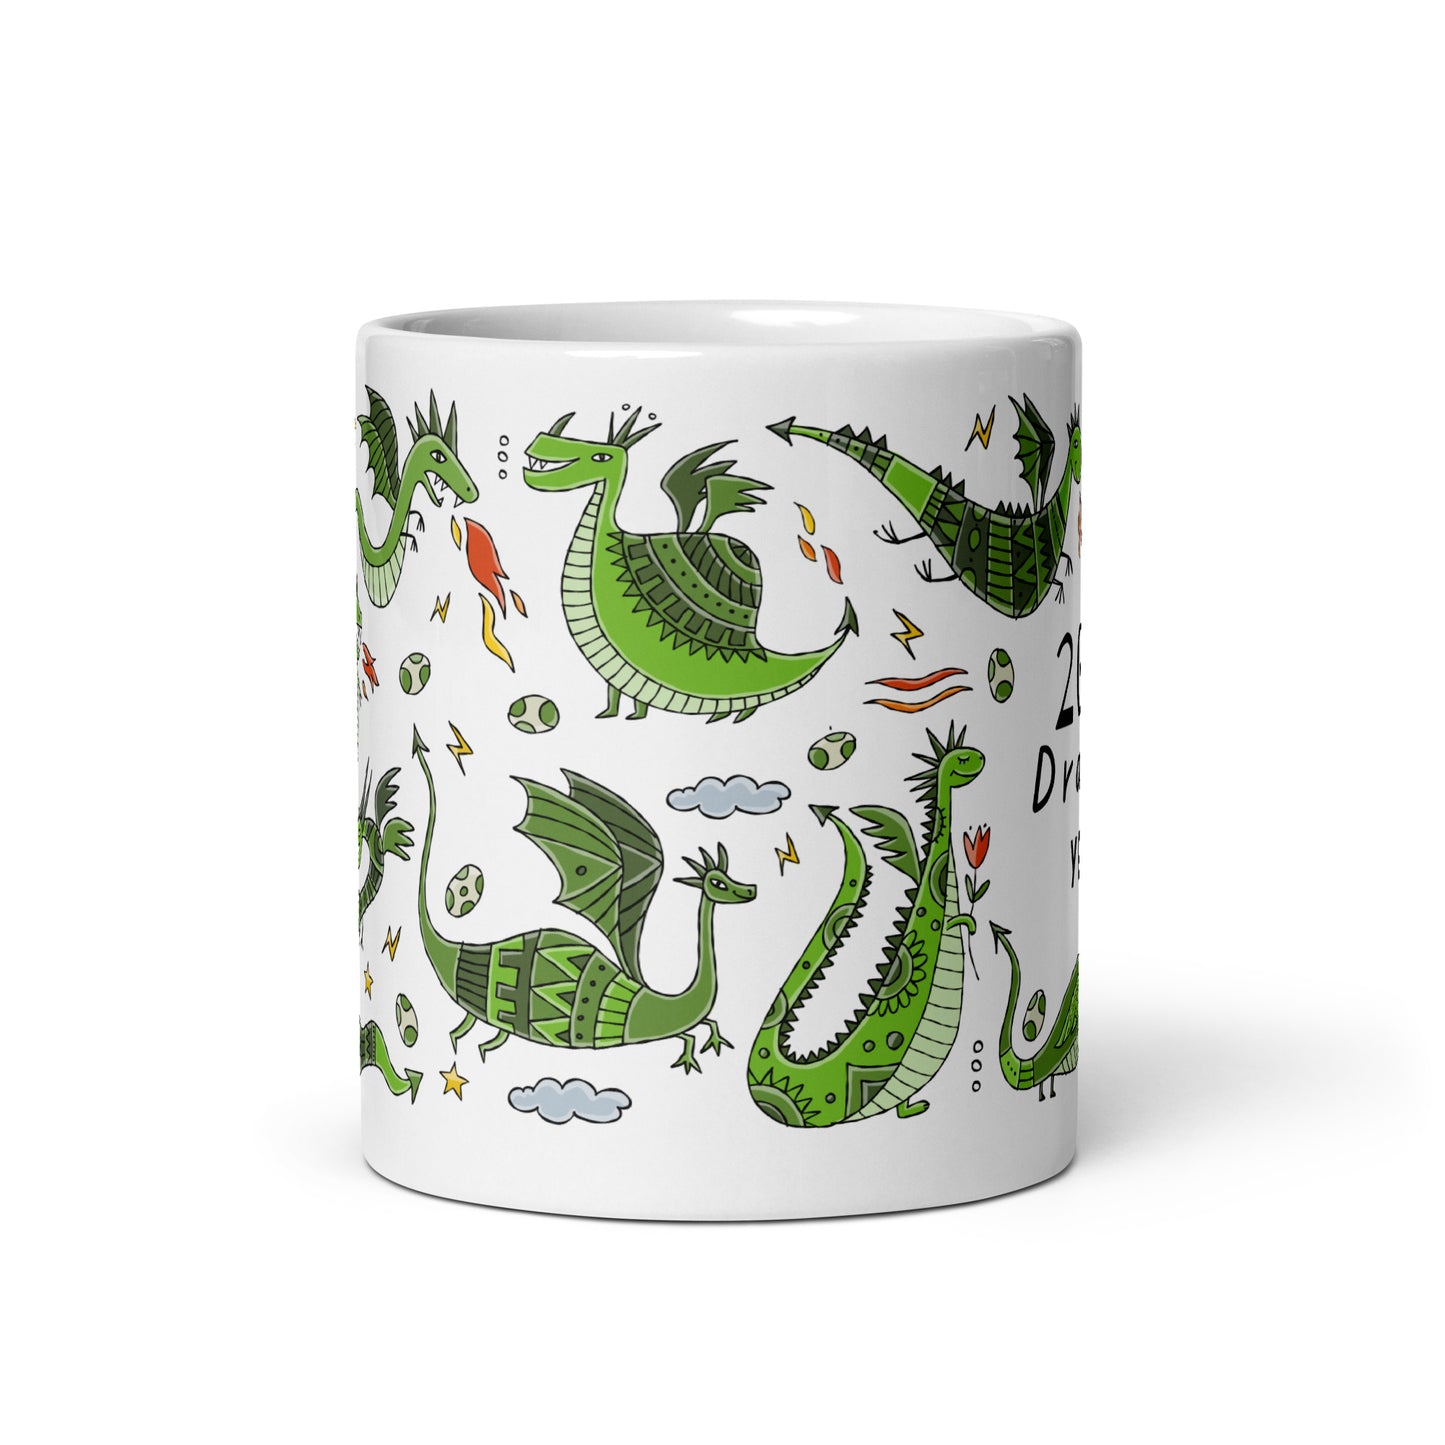 White glossy mug 11 oz personalised with symbol of 2024 Year - funny green Dragons